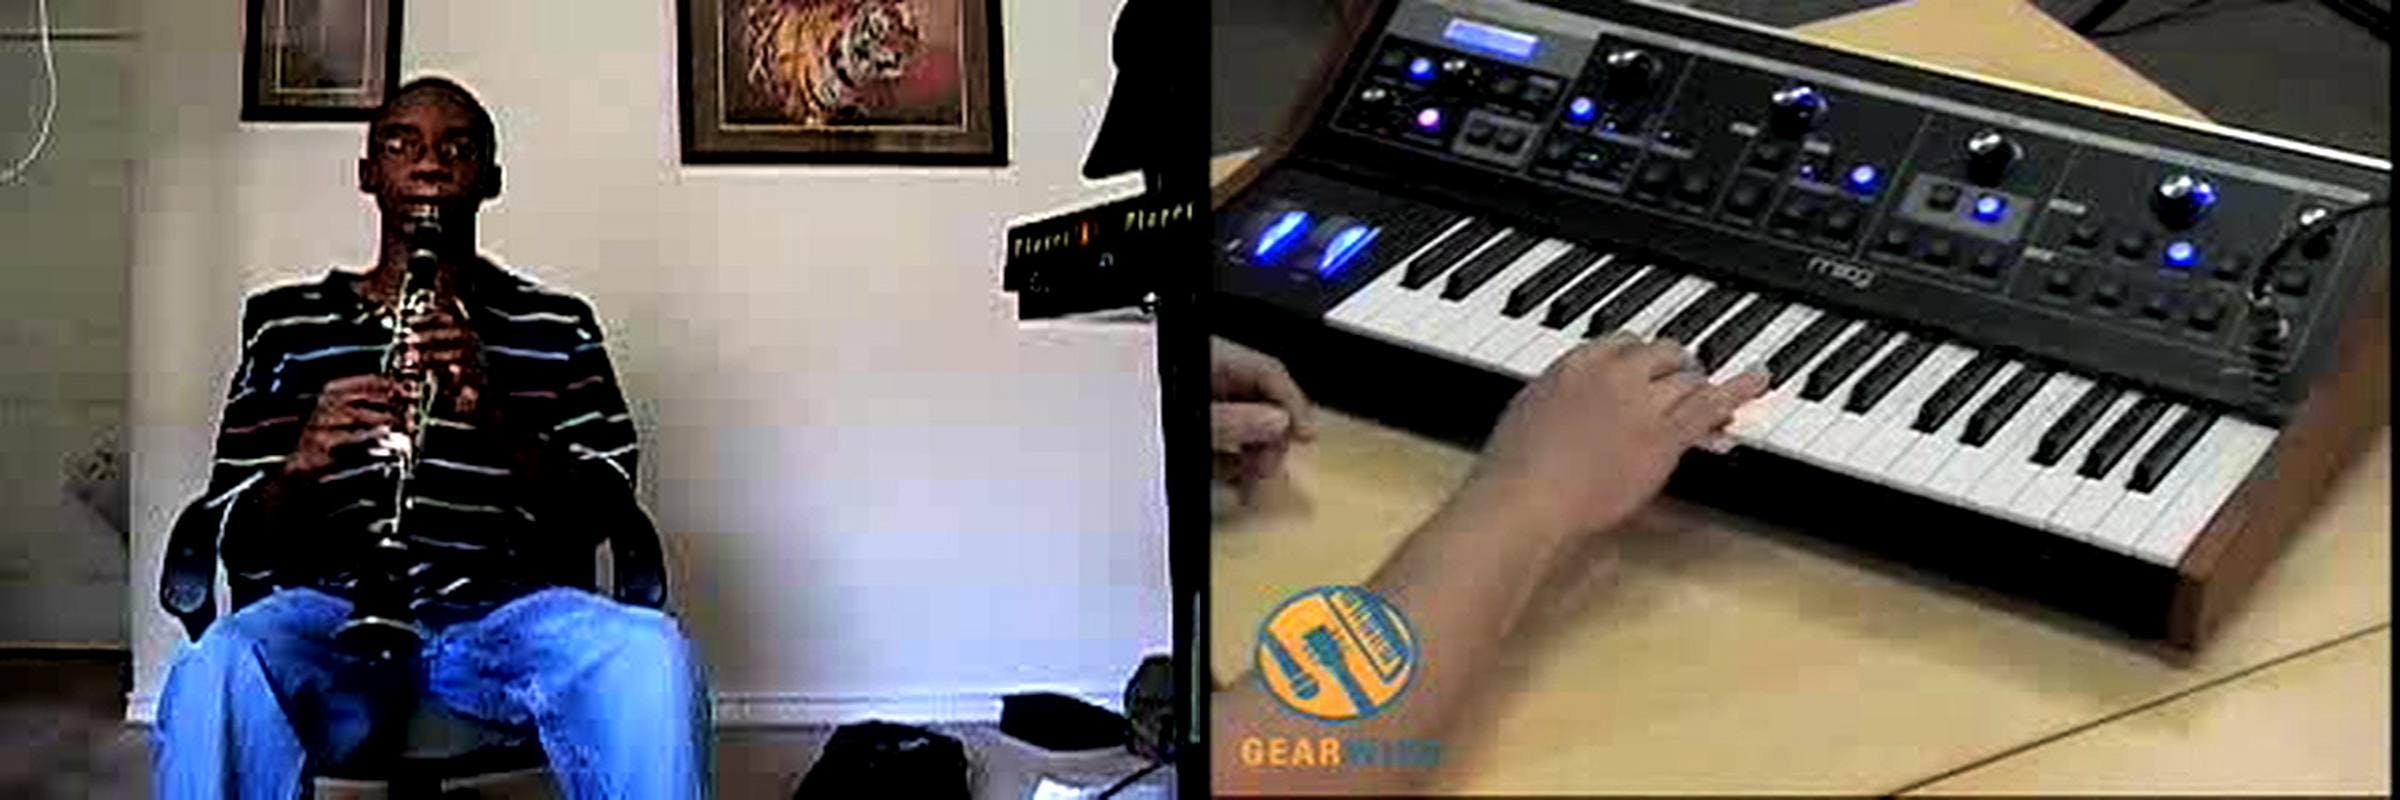 Image split into two halves. The left shows a person in a striped top and jeans sat down playing a clarinet. On the right, we see a keyboard from above with hands playing the keys